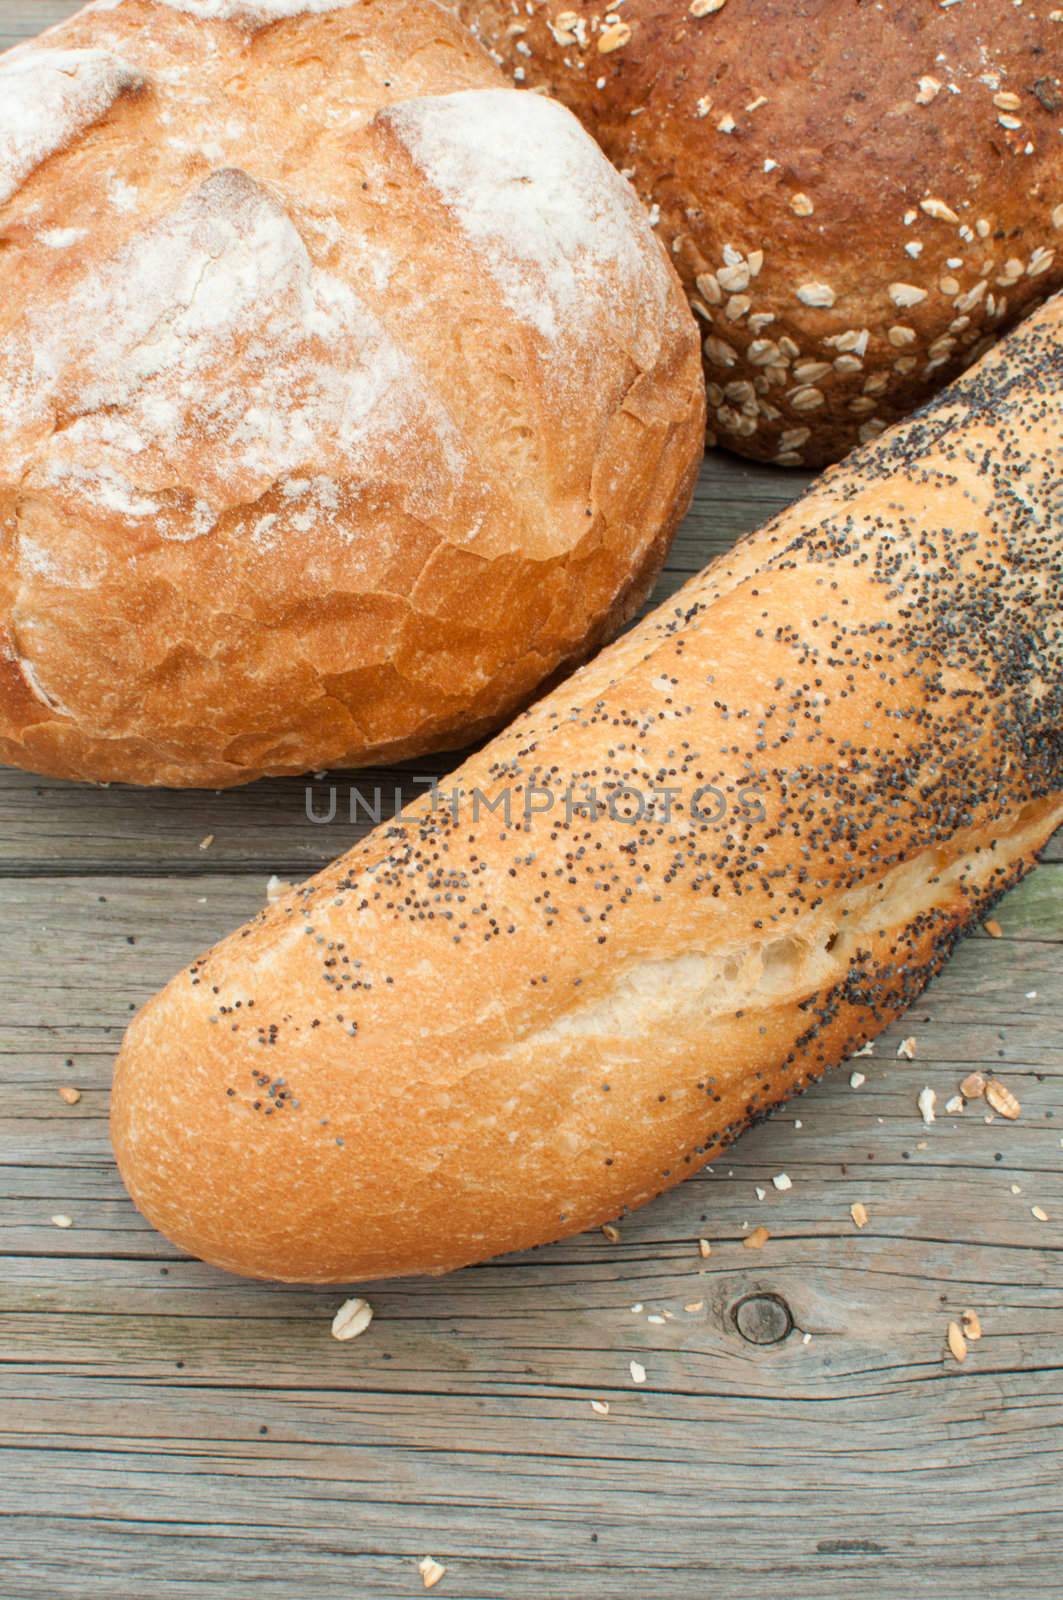 Closeup of round, seeded bread loaves and french baguette